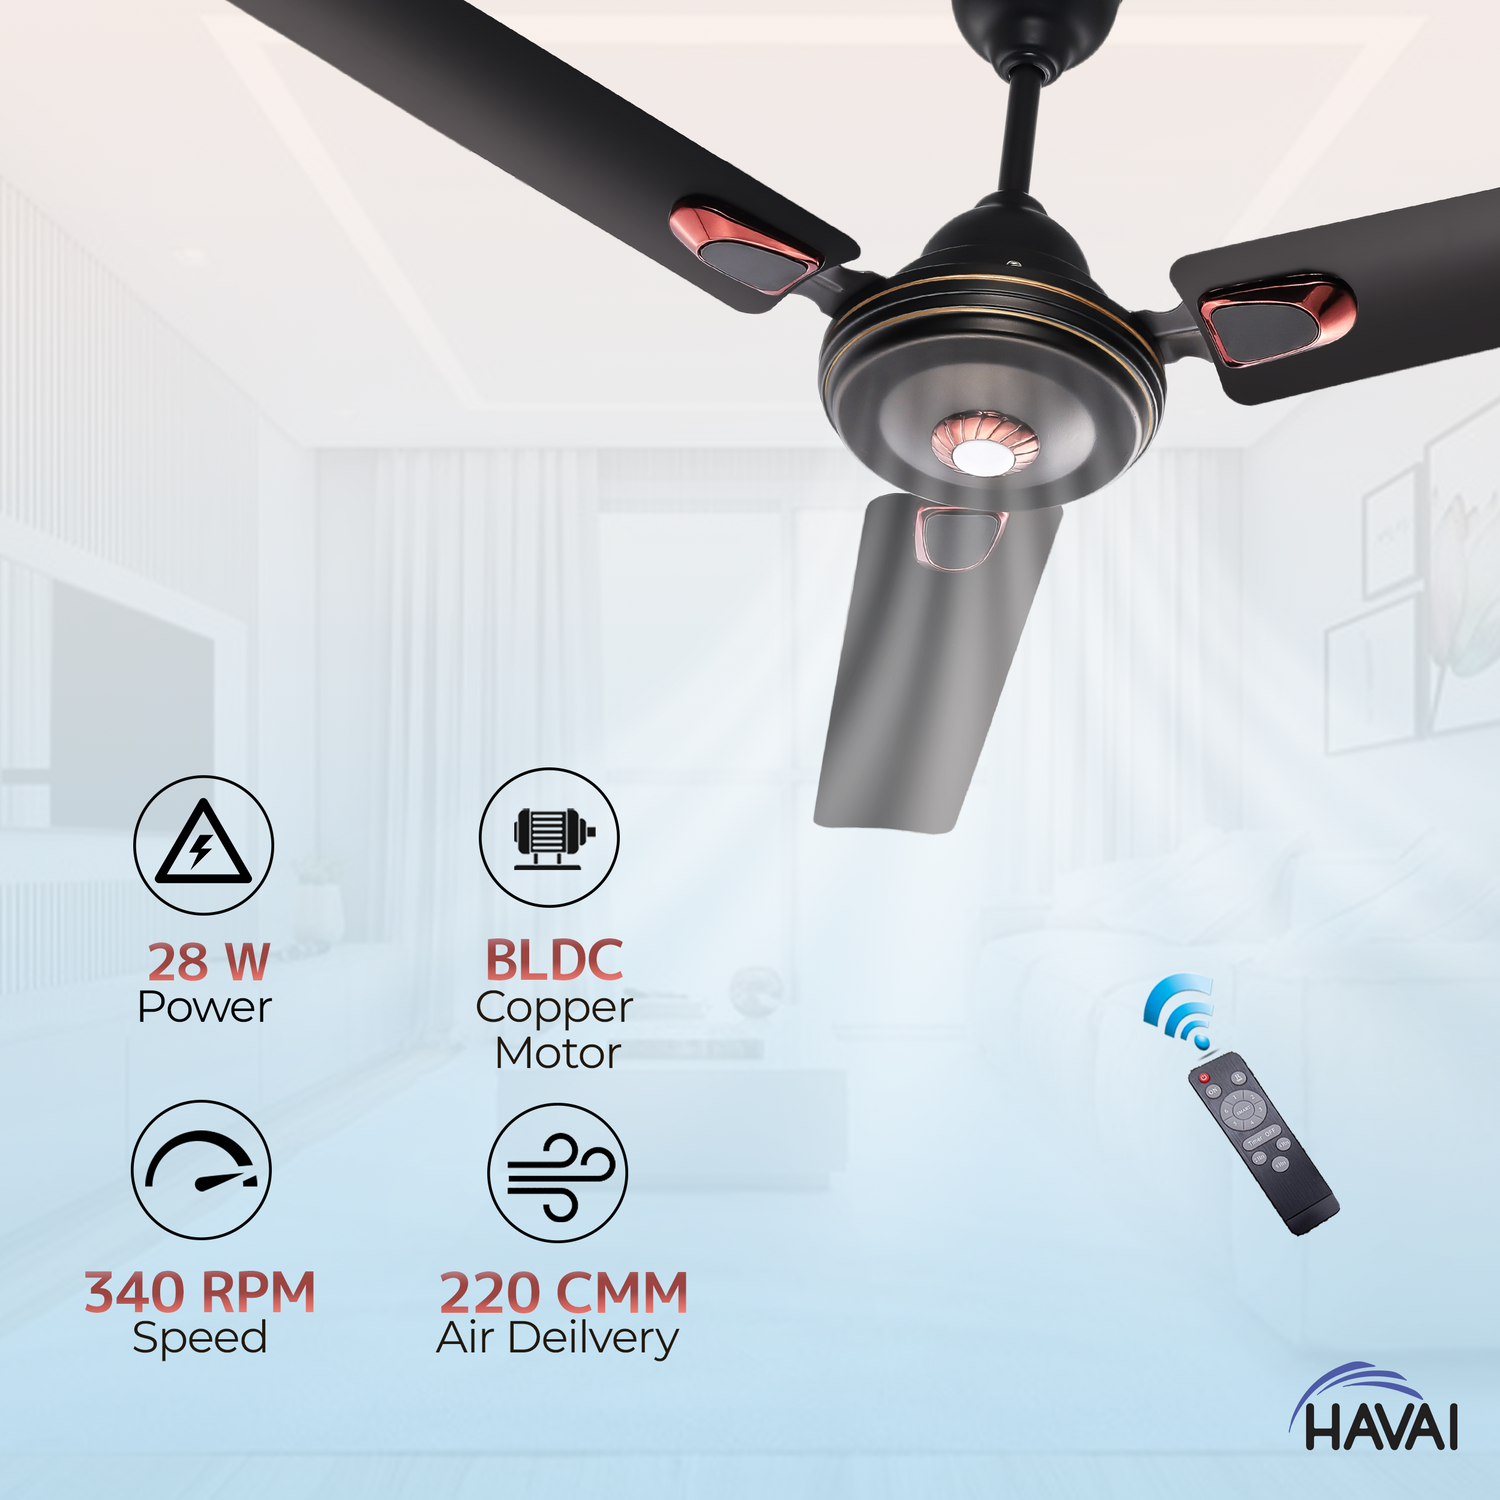 HAVAI Spinel BLDC Ceiling Fan 28W, 1200mm Blade with Remote - Smoky Brown, Leaf Deco